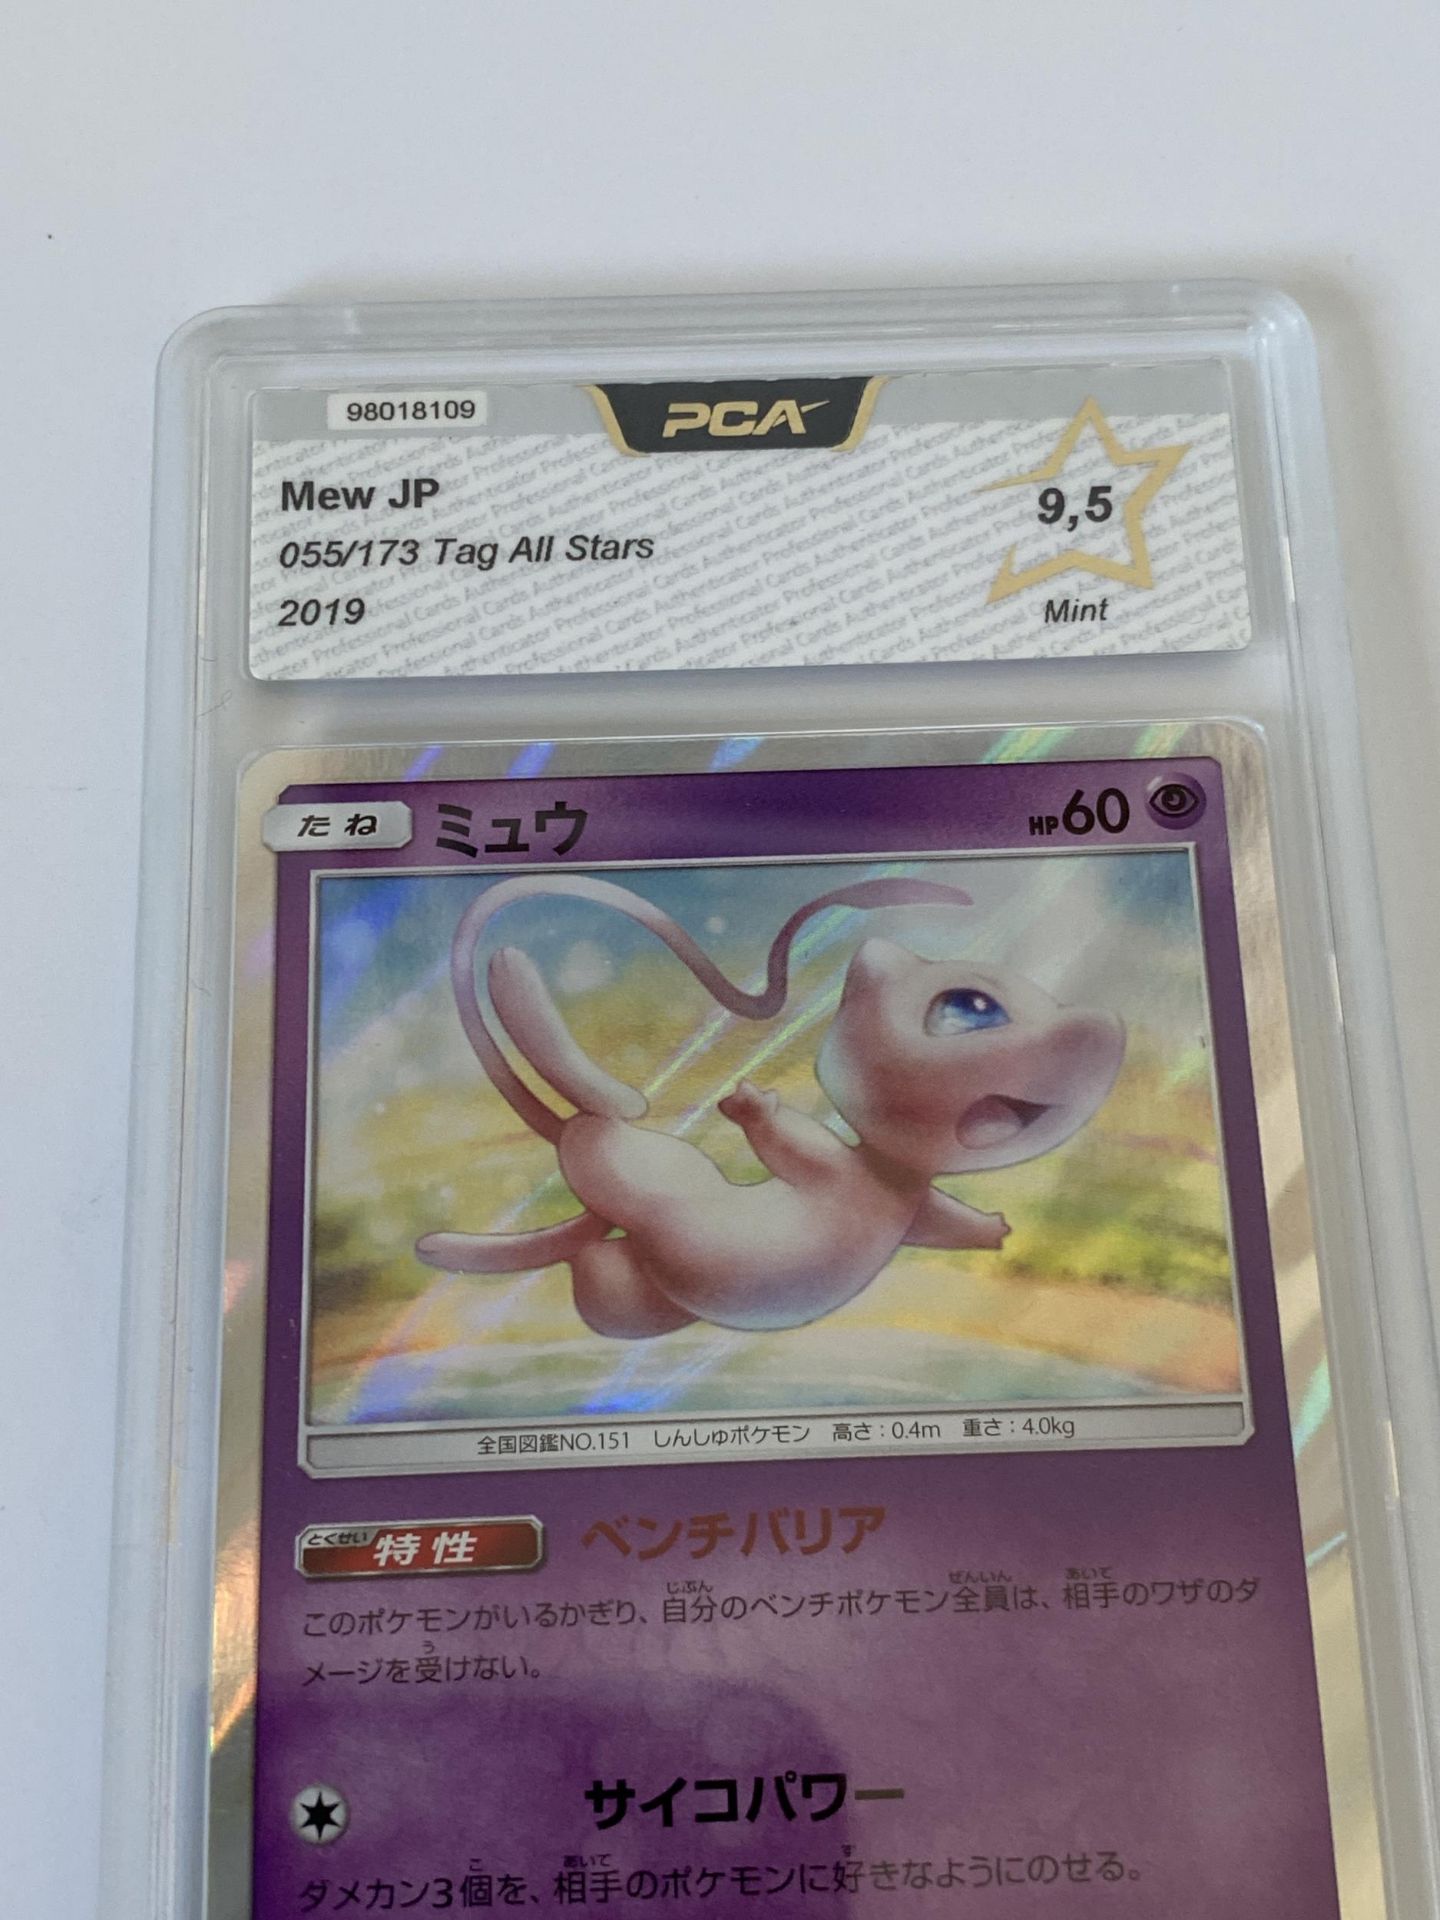 A JAPANESE GRADED POKEMON CARD -MEW 055/173 TAG ALL STARS - PCA GRADE - 9.5 - Image 2 of 3